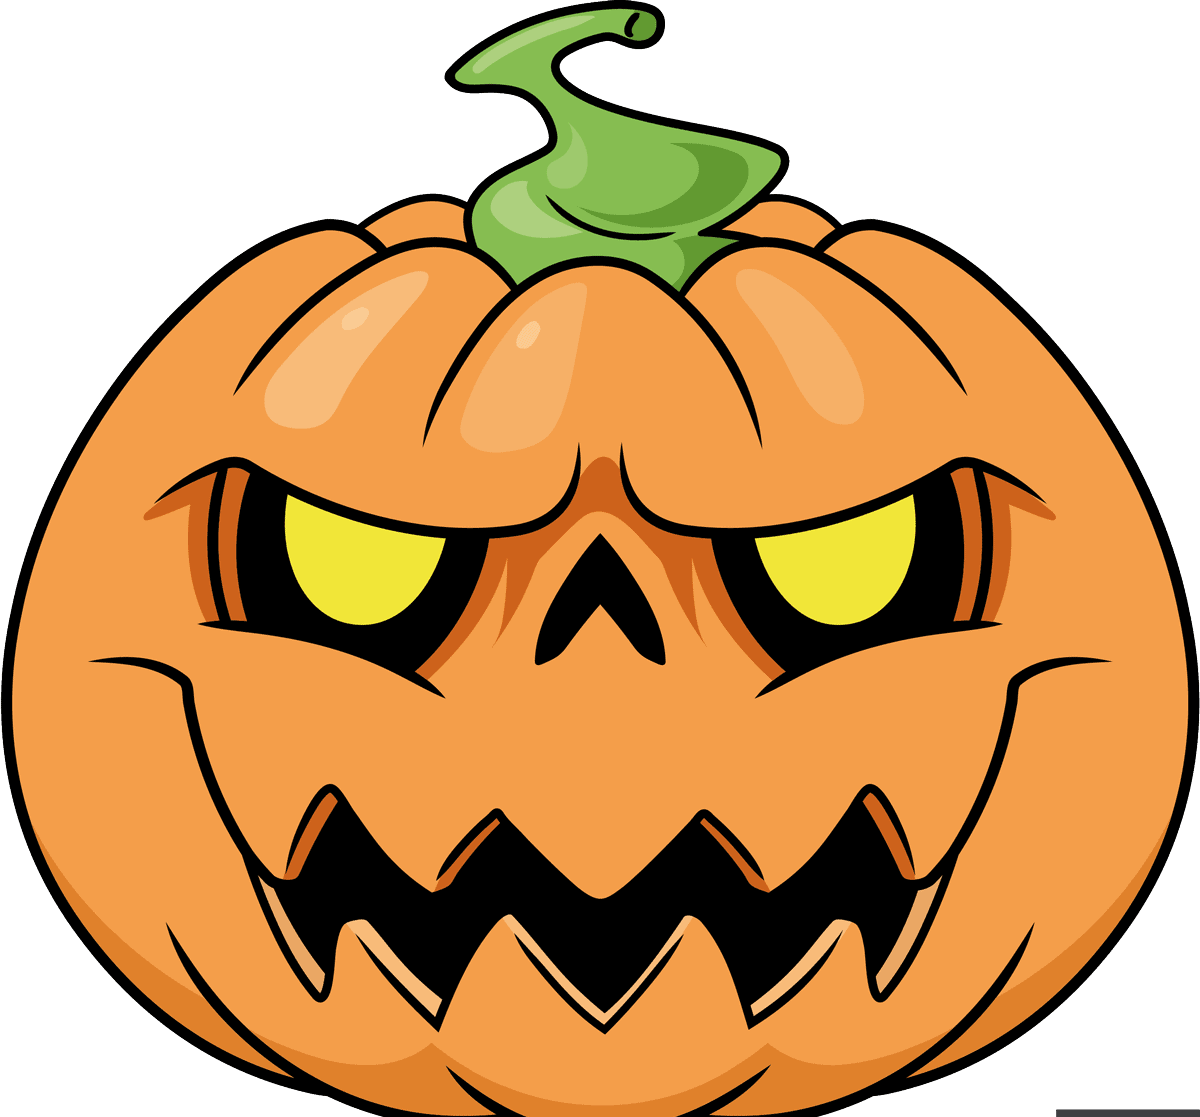 How to Draw a Halloween Pumpkin for kids